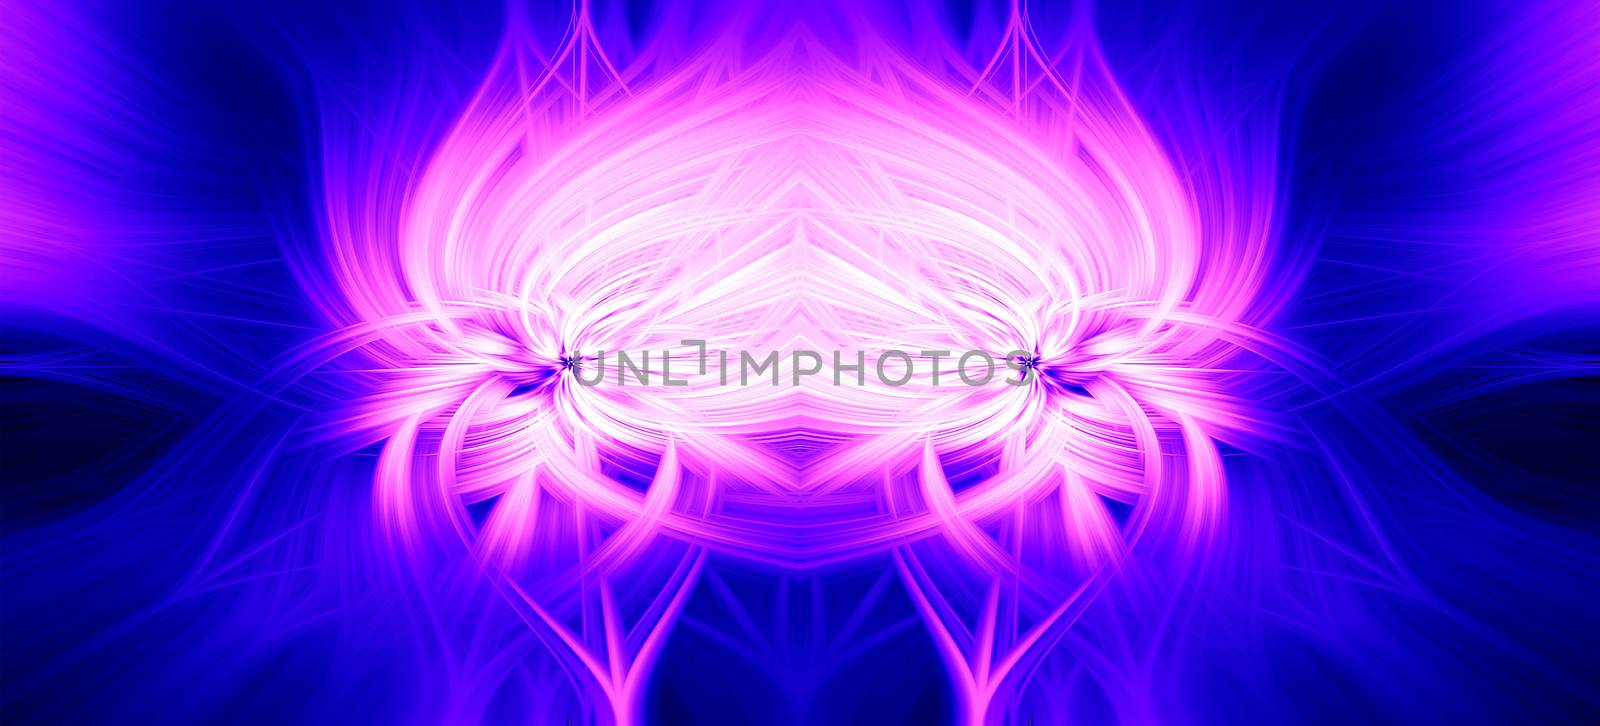 Beautiful abstract intertwined 3d fibers forming a shape of sparkle, flame, flower, interlinked hearts. Blue and pink colors. Illustration.